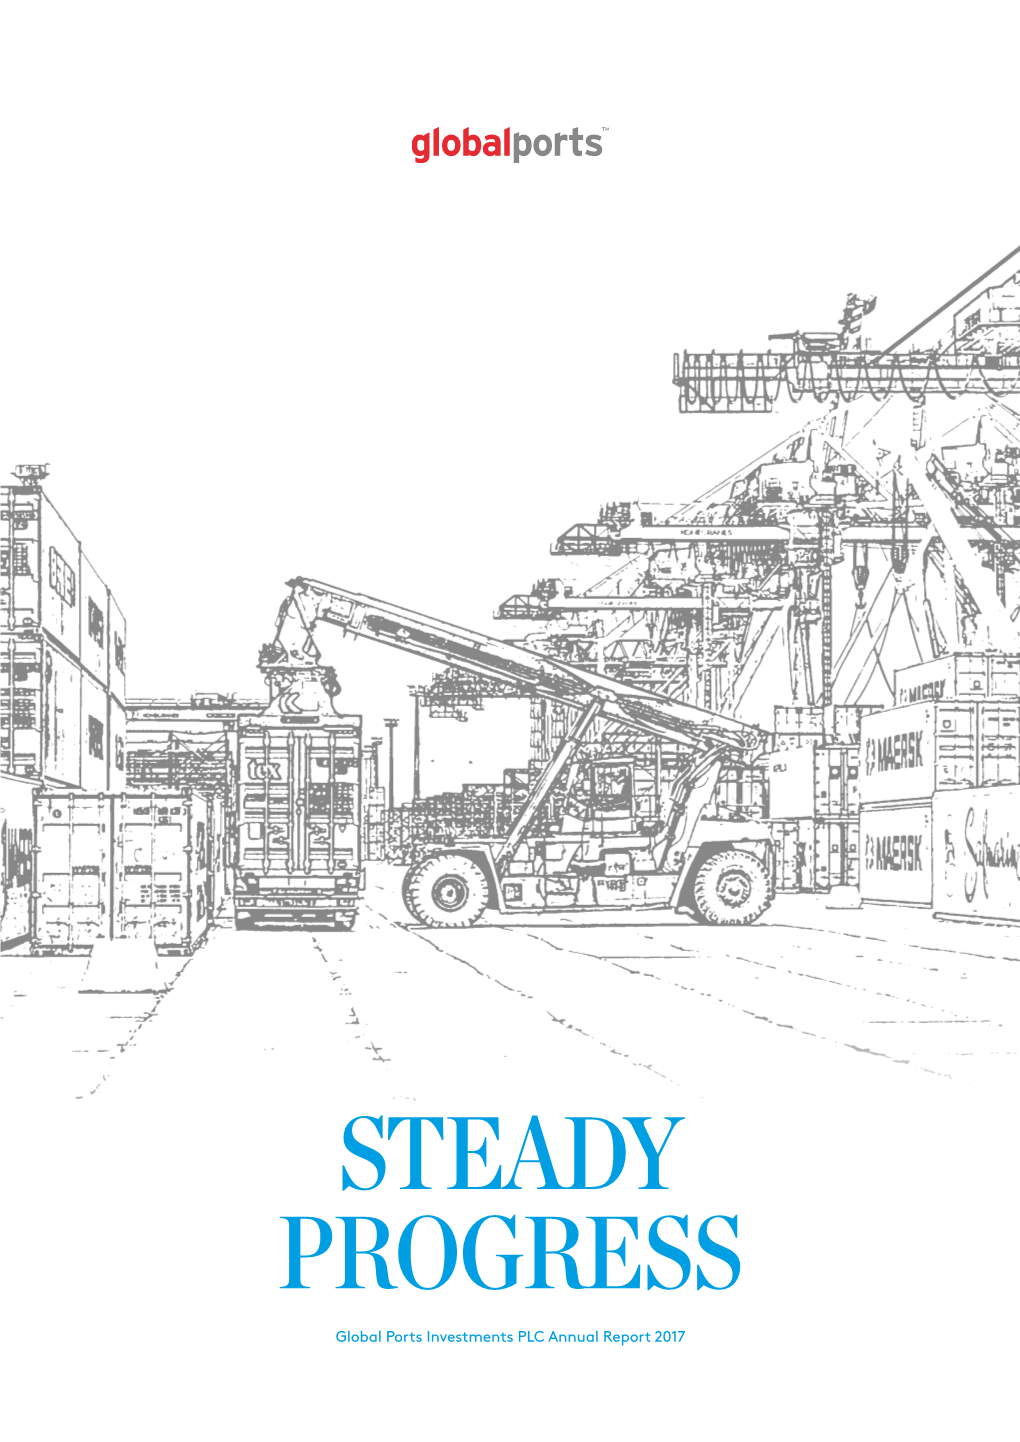 STEADY PROGRESS Global Ports Investments PLC Annual Report 2017 GLOBAL PORTS RUSSIA’S LEADING CONTAINER TERMINAL OPERATOR BASED on THROUGHPUT and CAPACITY